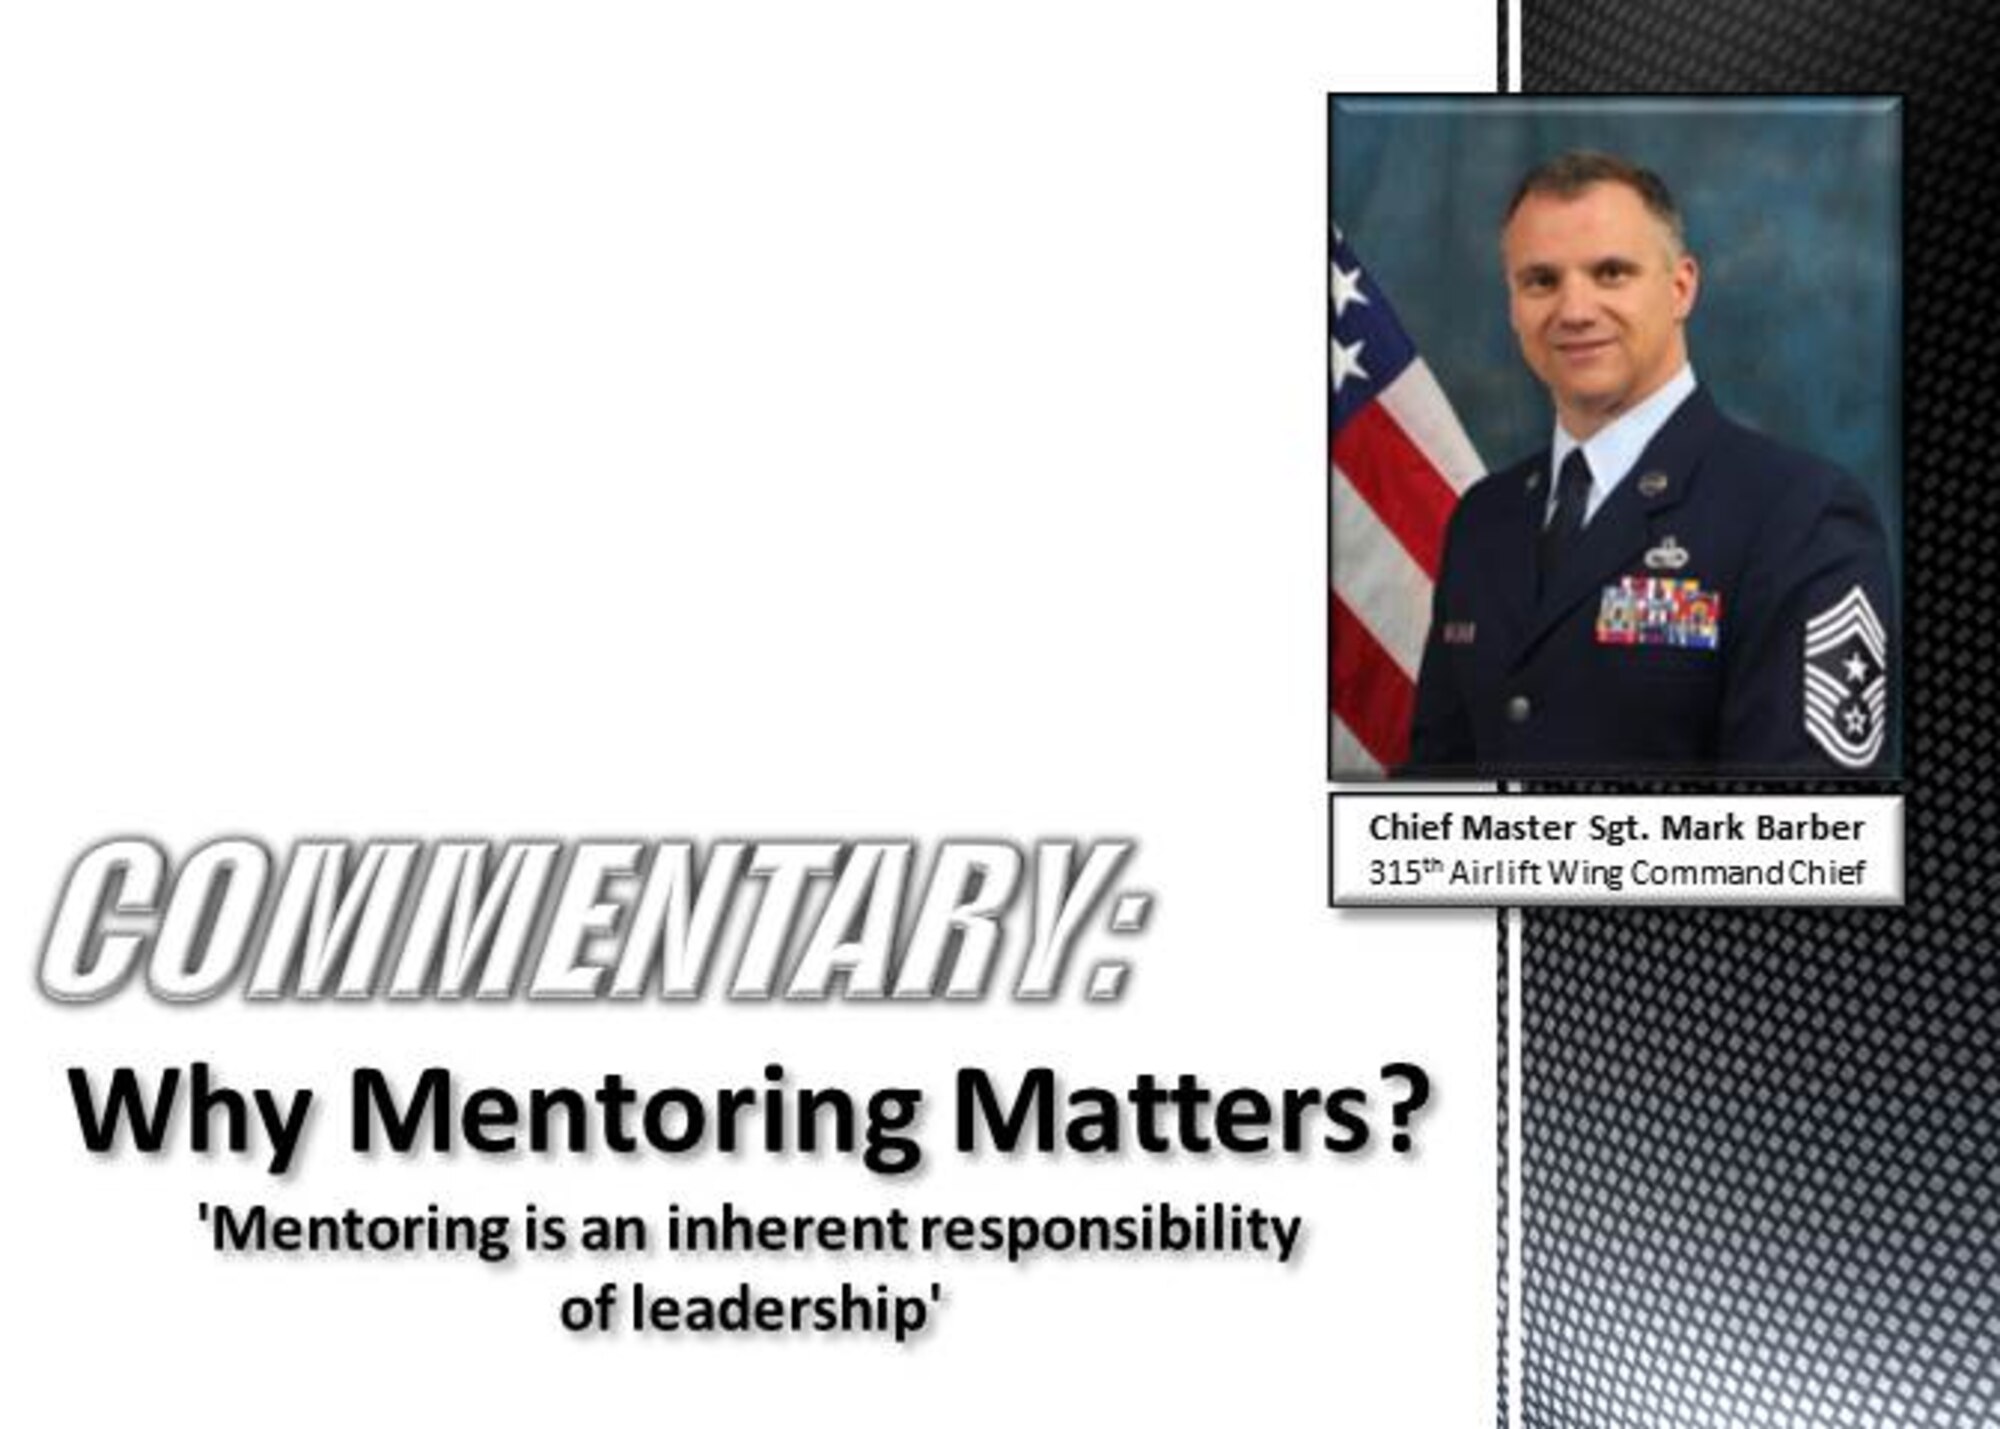 Commentary: Why Mentoring Matters? "Mentoring is an inherant responsibility of leadership."